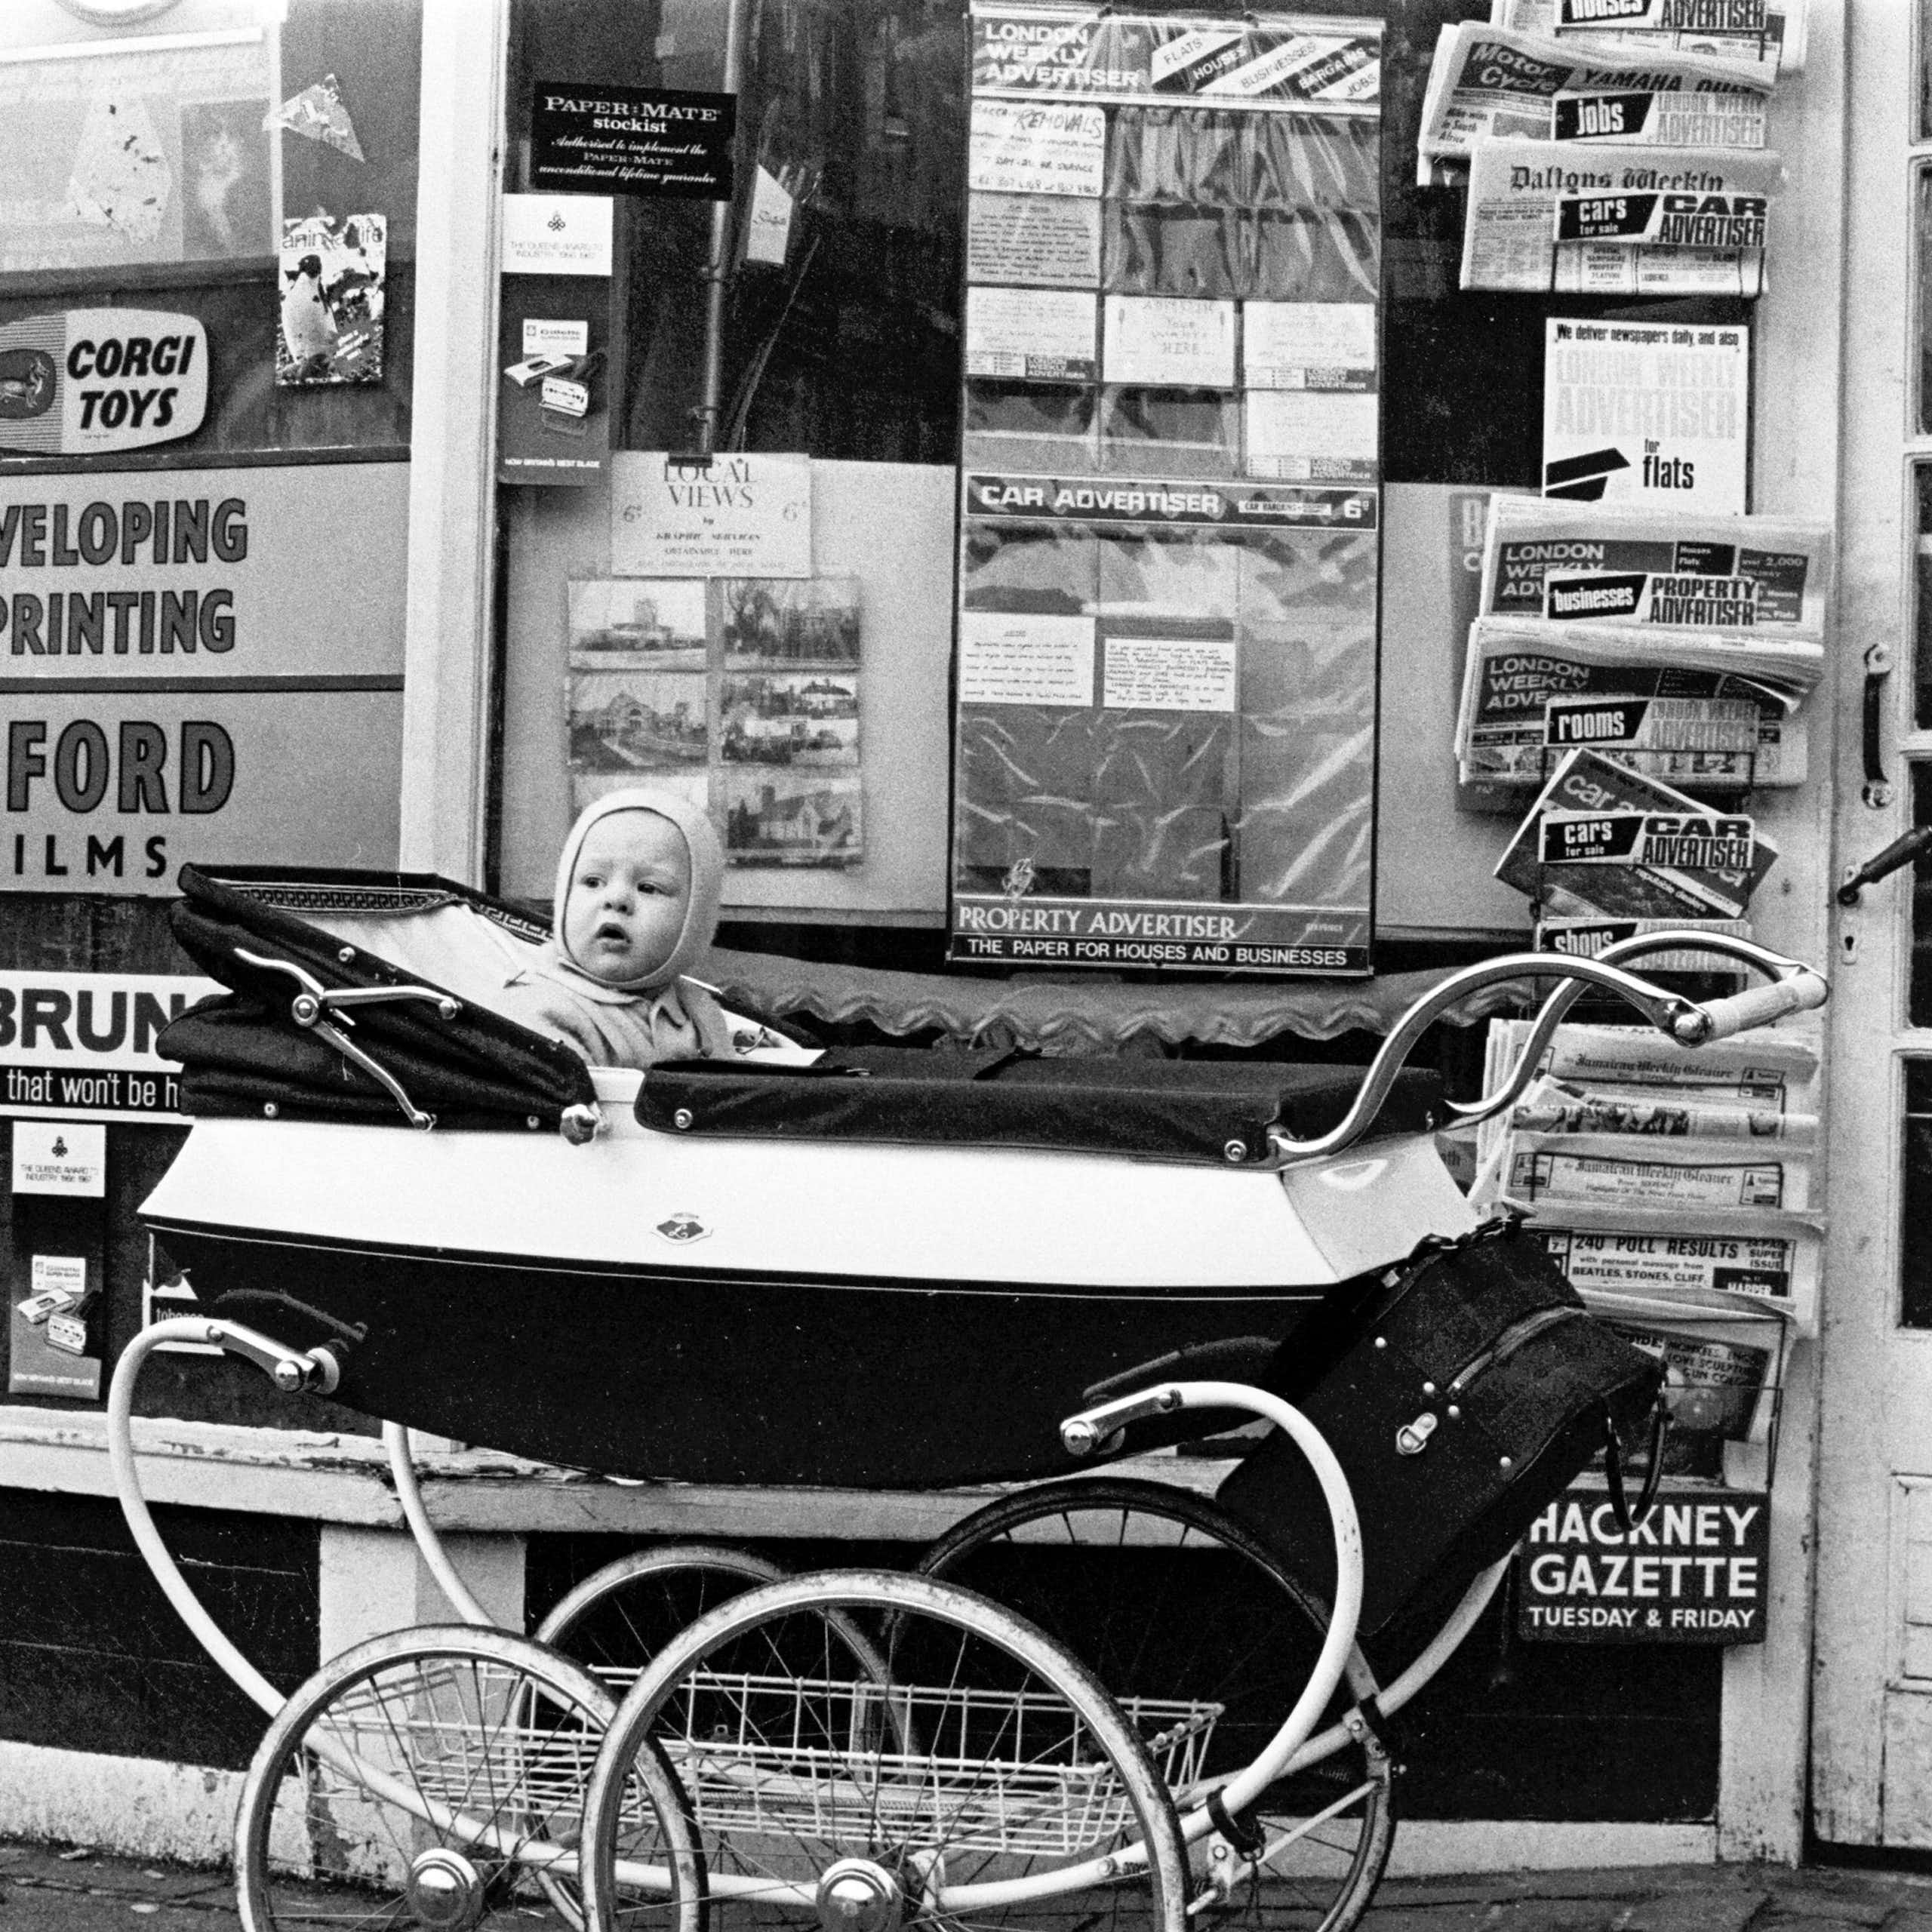 A baby in a pram in an archival black and white photograph.